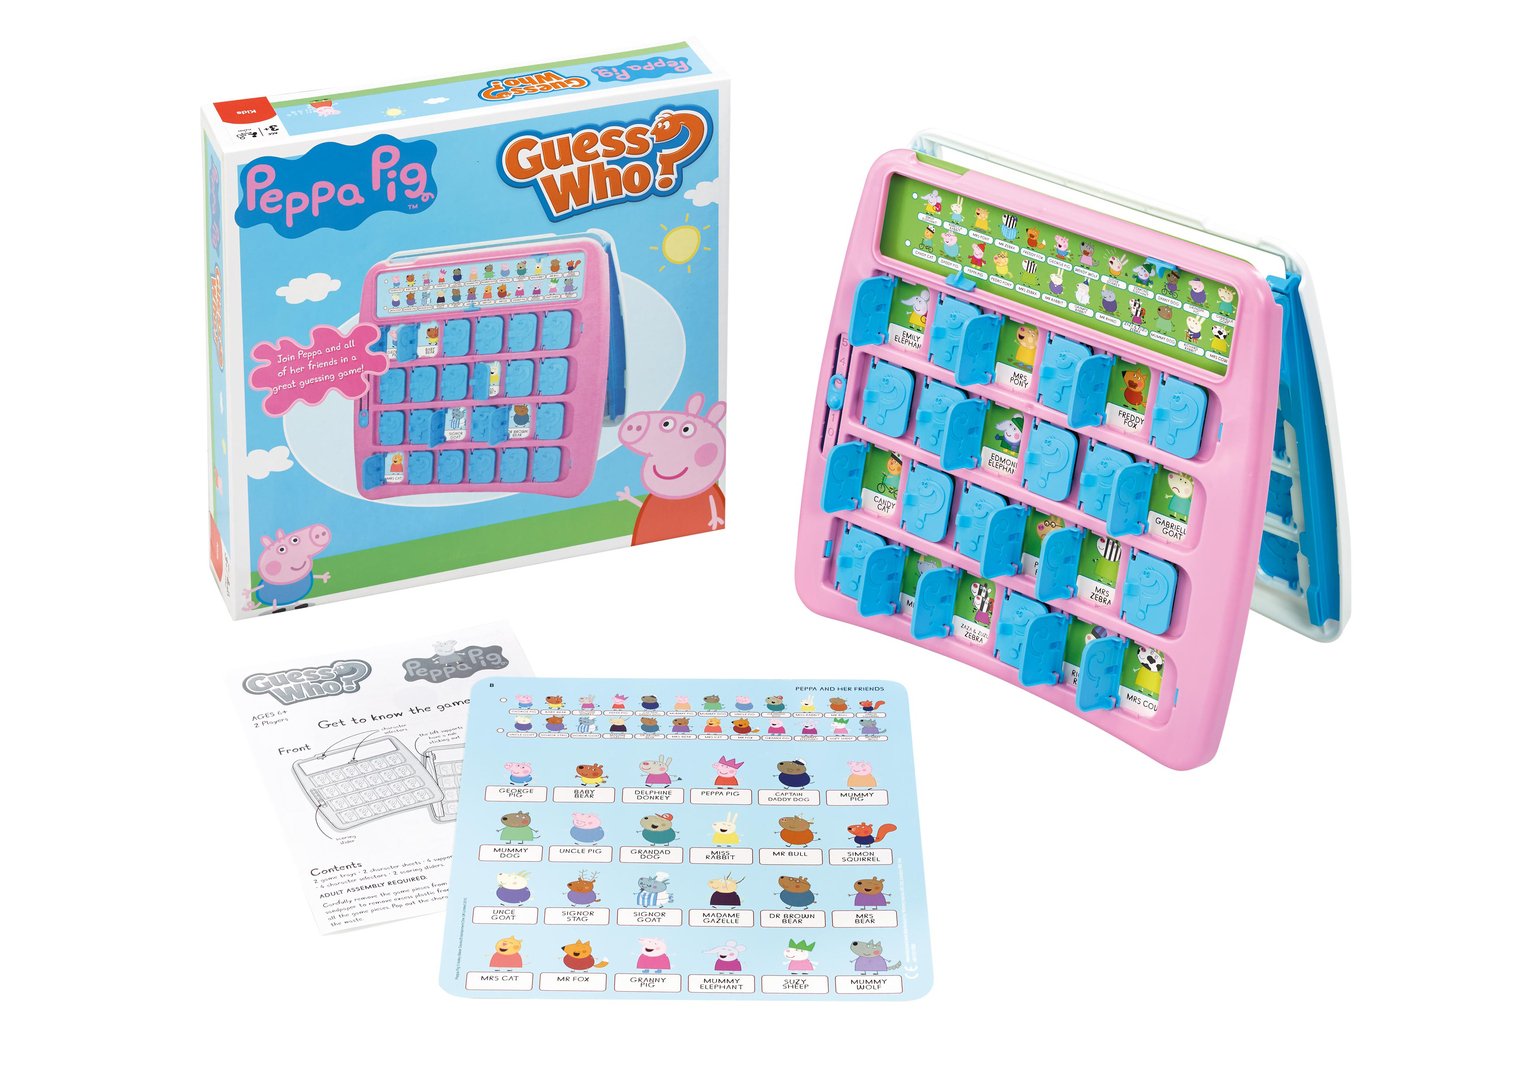 Peppa Pig Guess Who? Game Review